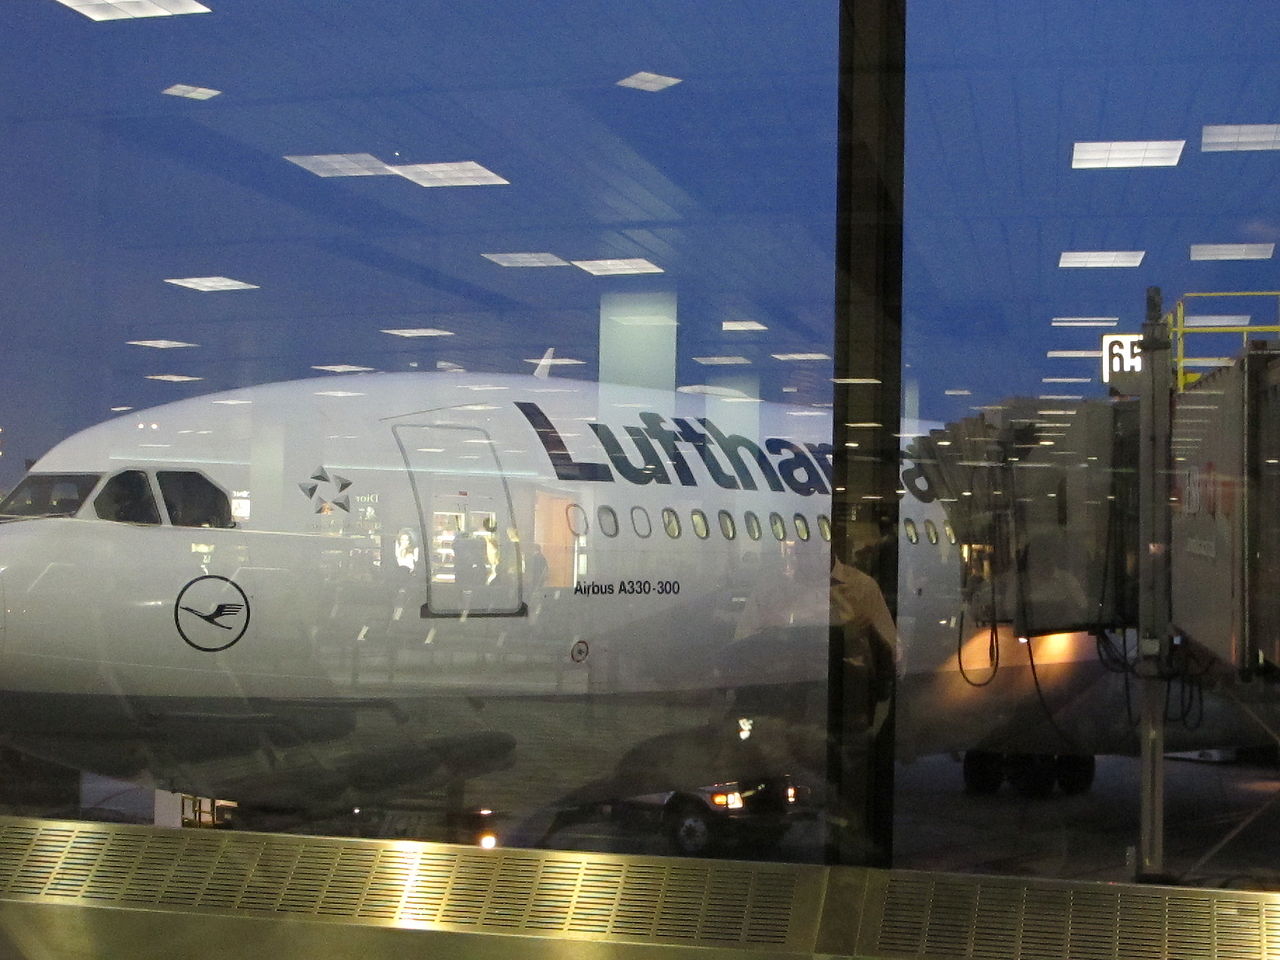 A Lufthansa Airbus at the gate in New York JFK airport.